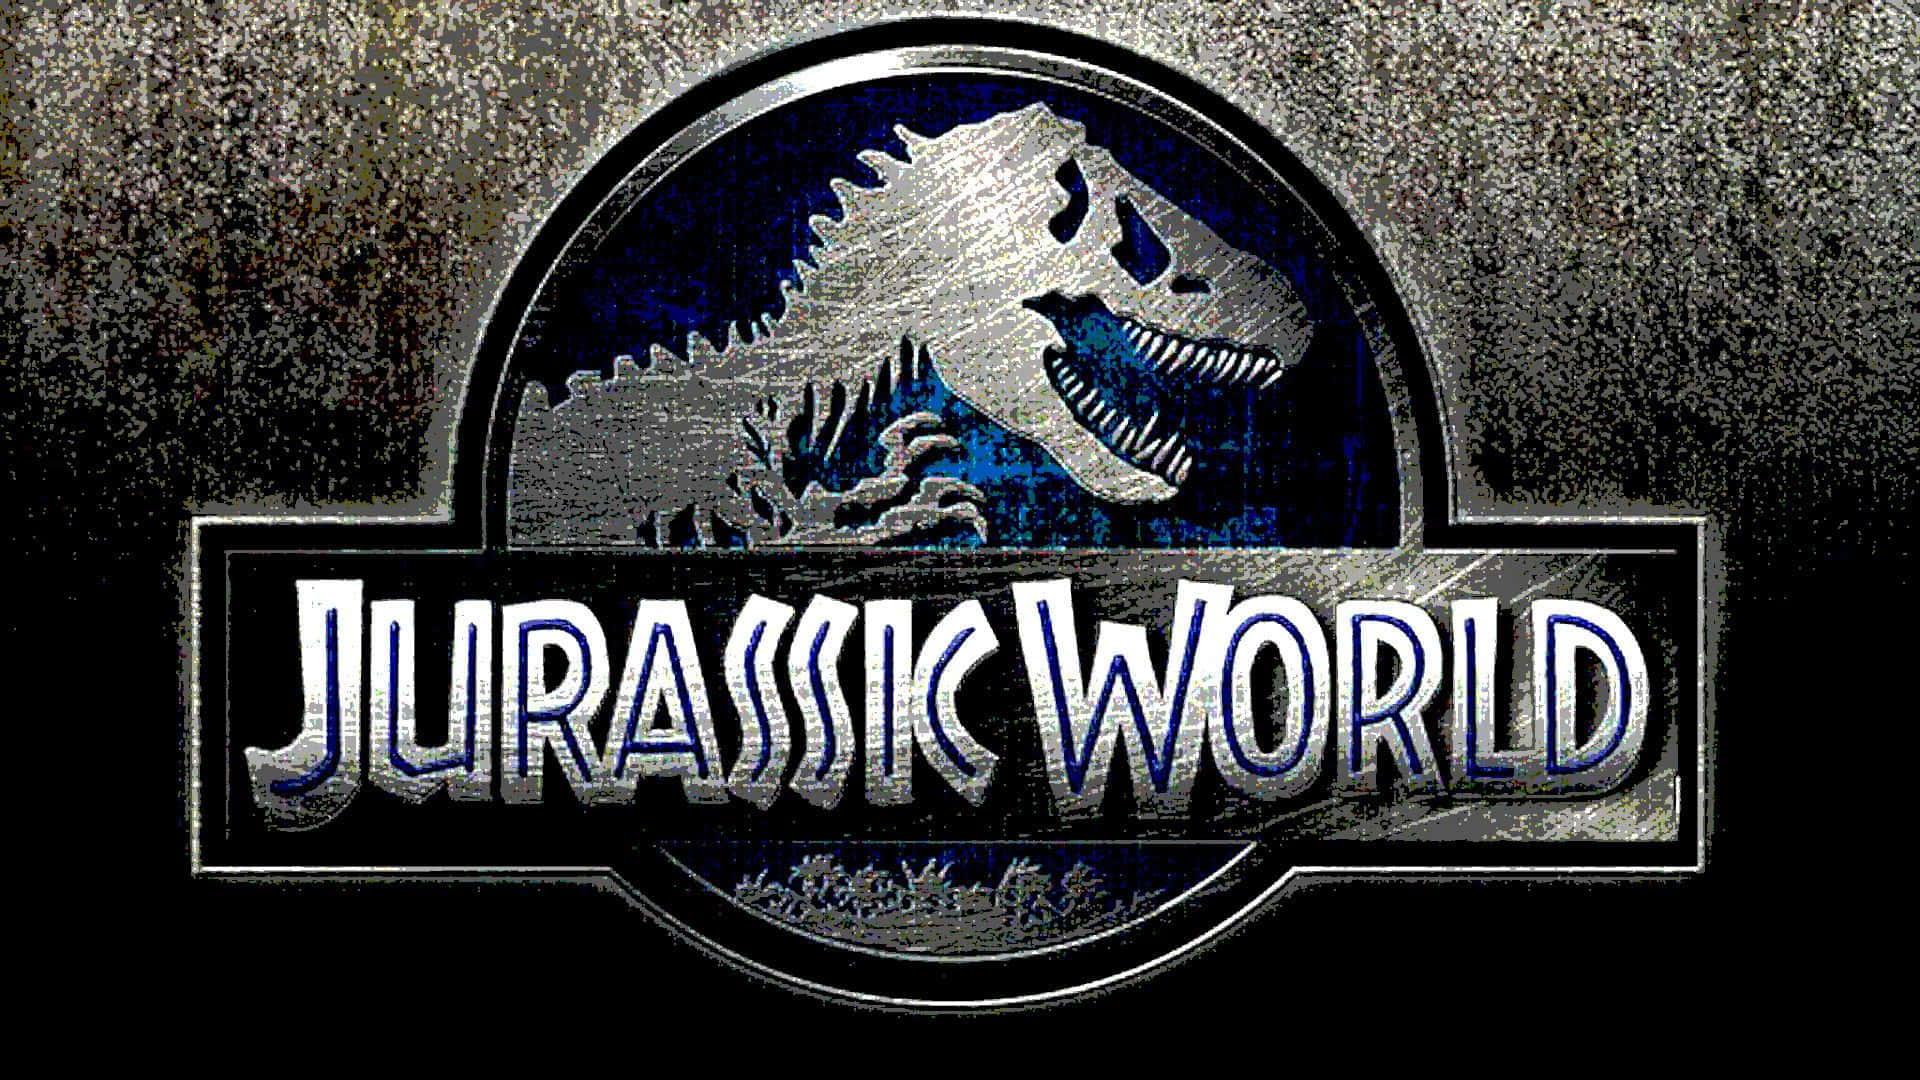 Travel back in time with Jurassic World.